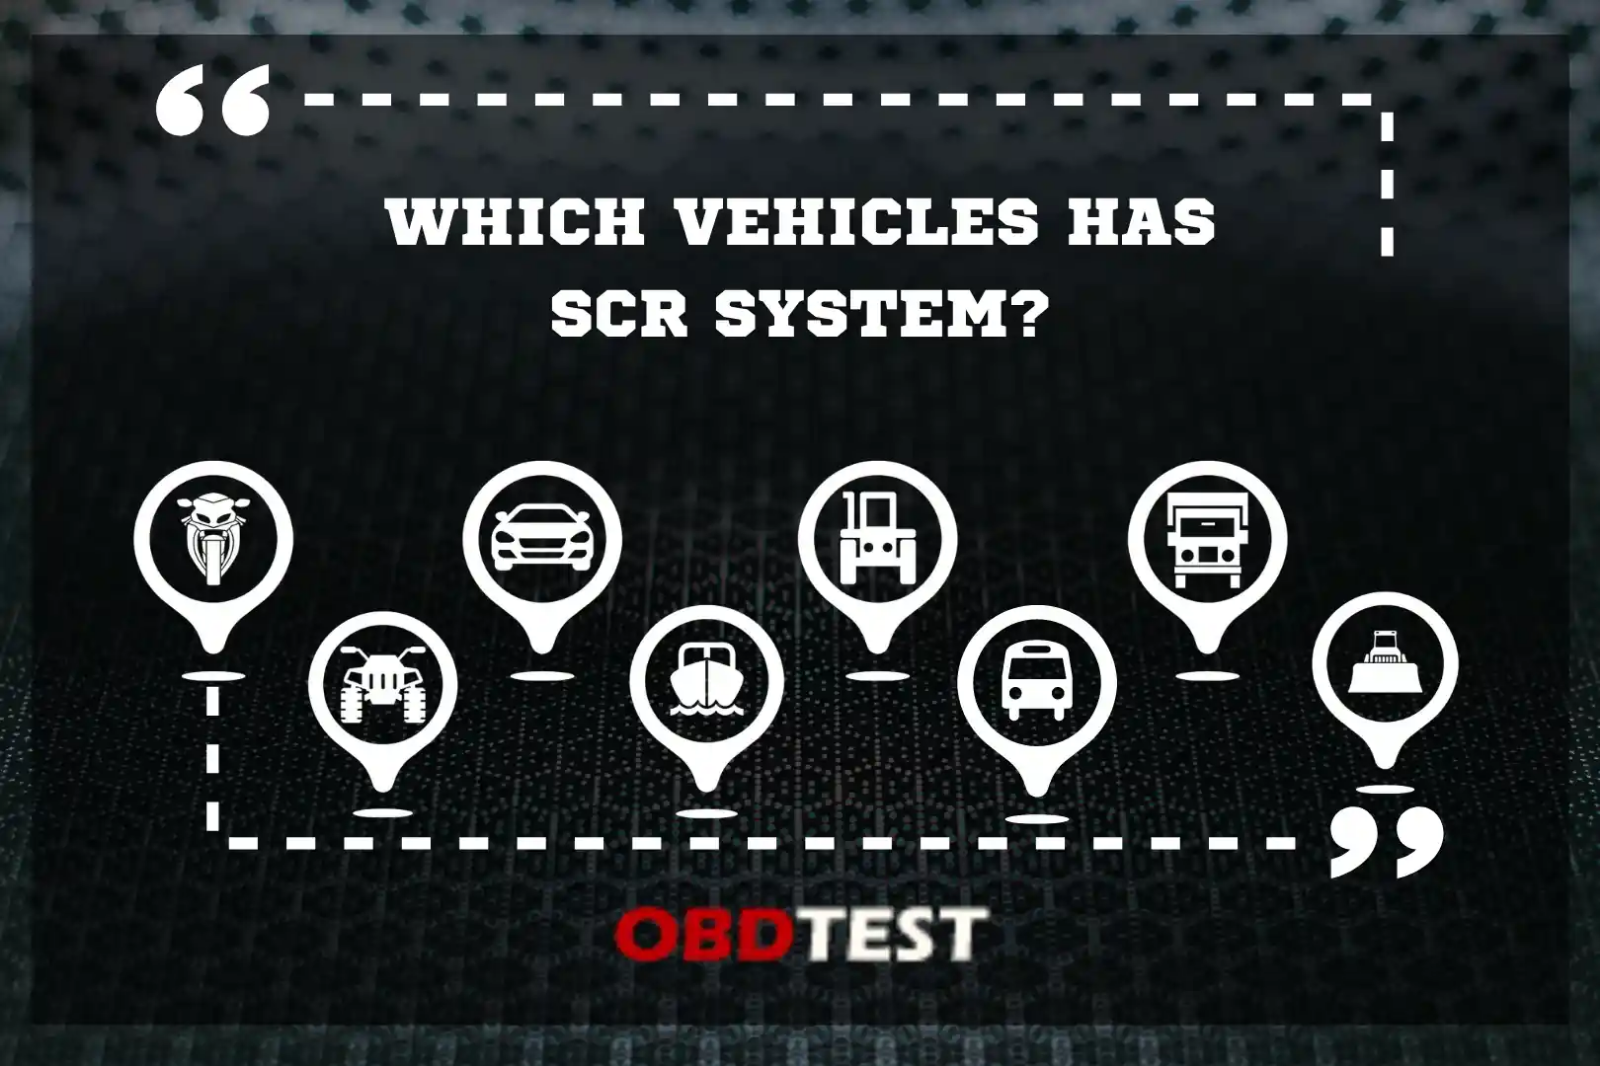 Which vehicles has SCR system?